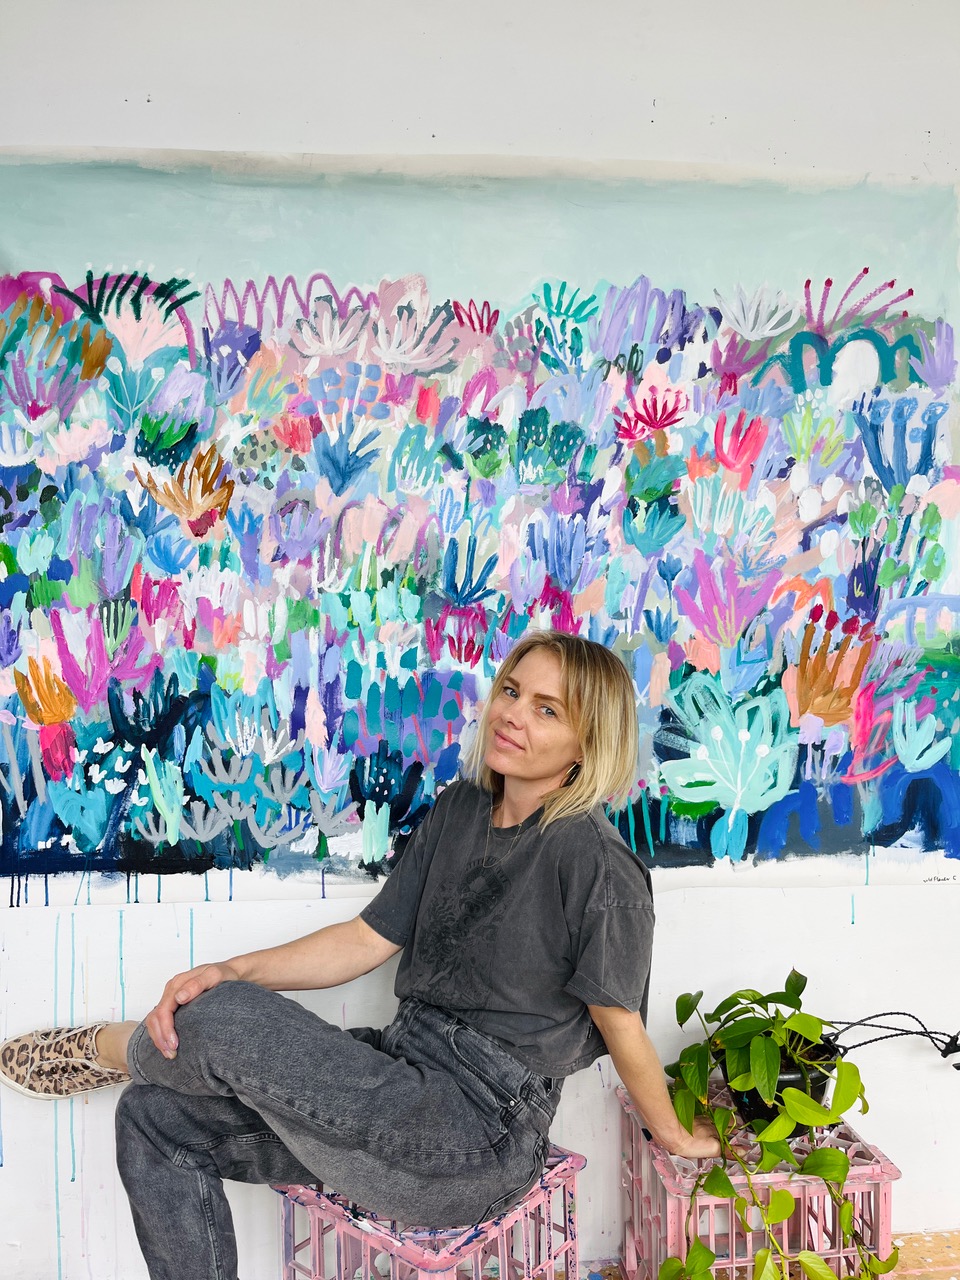 Anna Price in her studio in front of a large abstract artwork